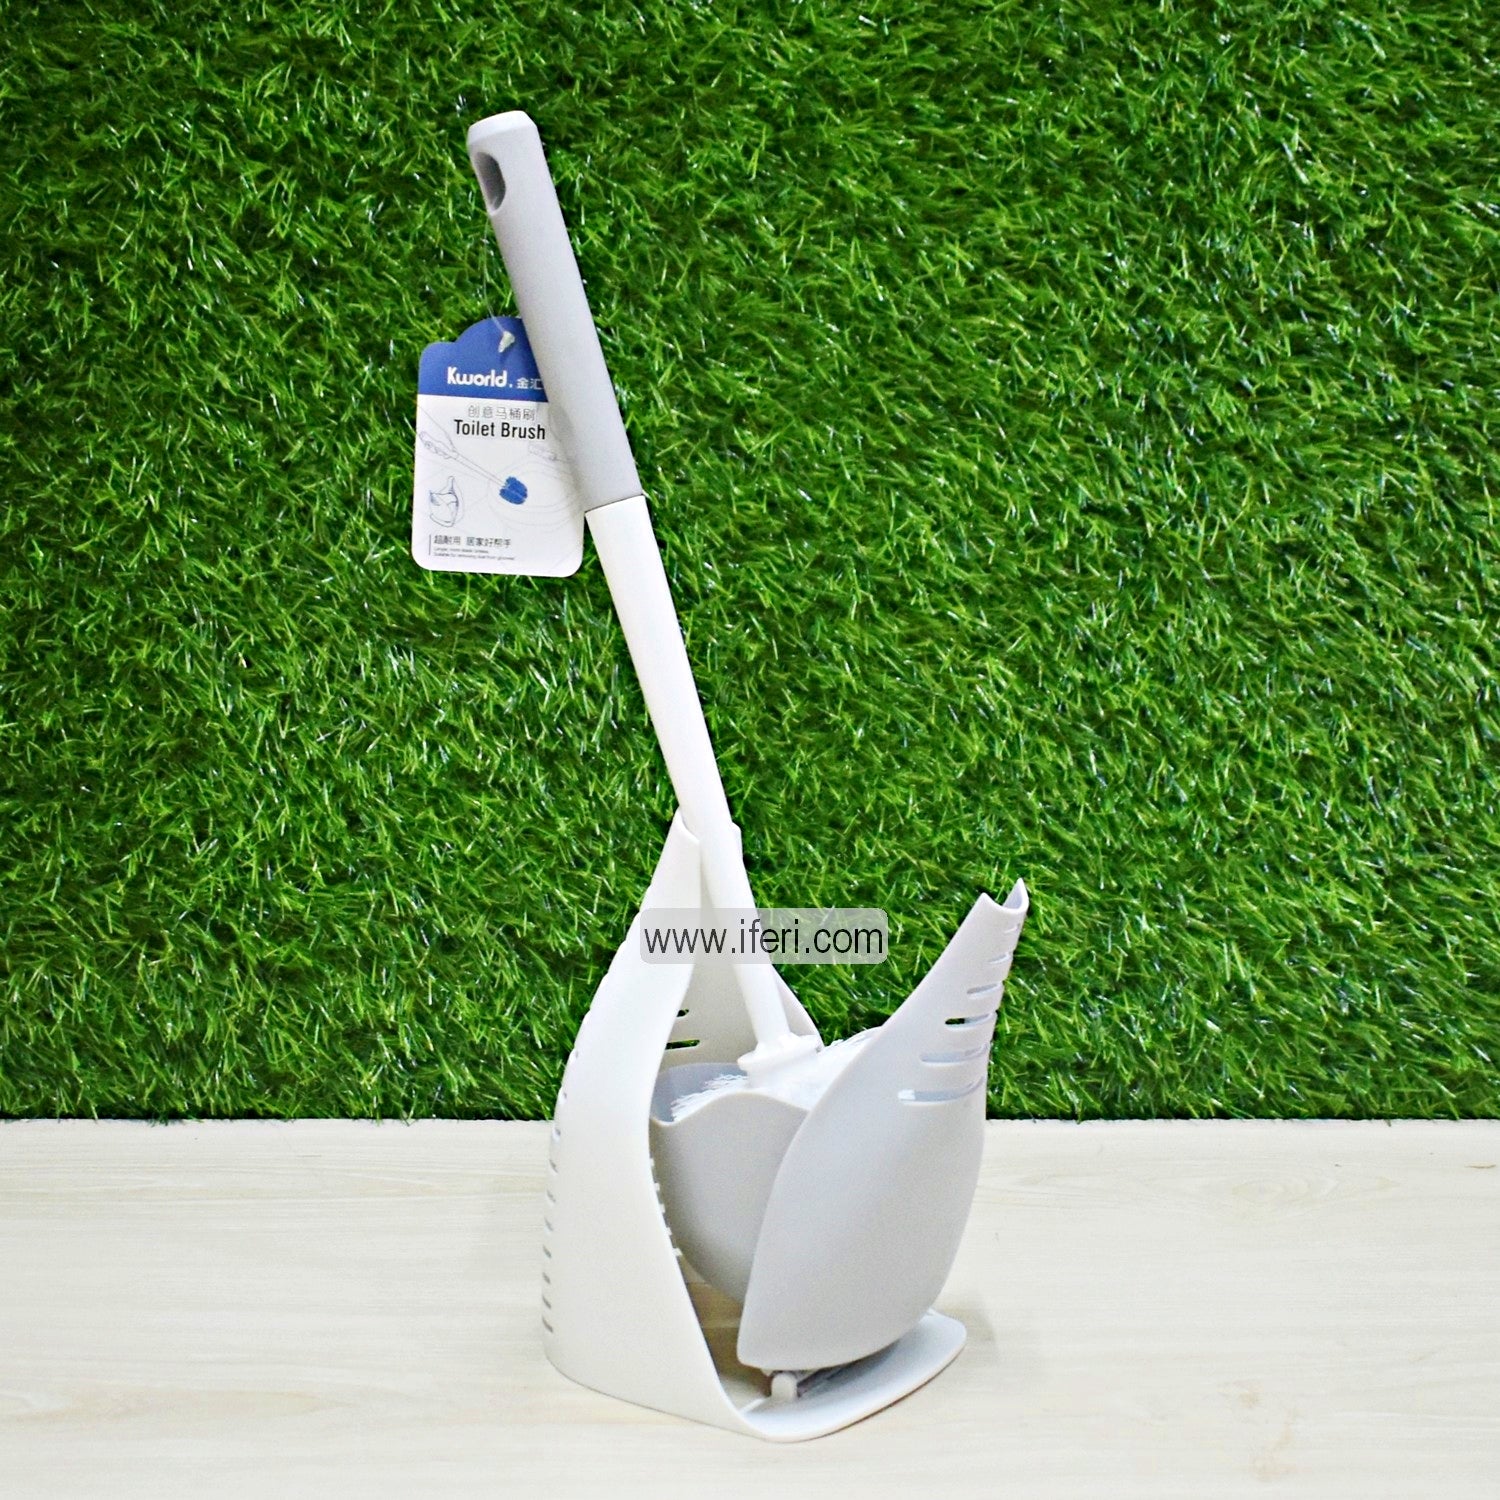 16 Inch Toilet Cleaning Brush with Holder SF9562